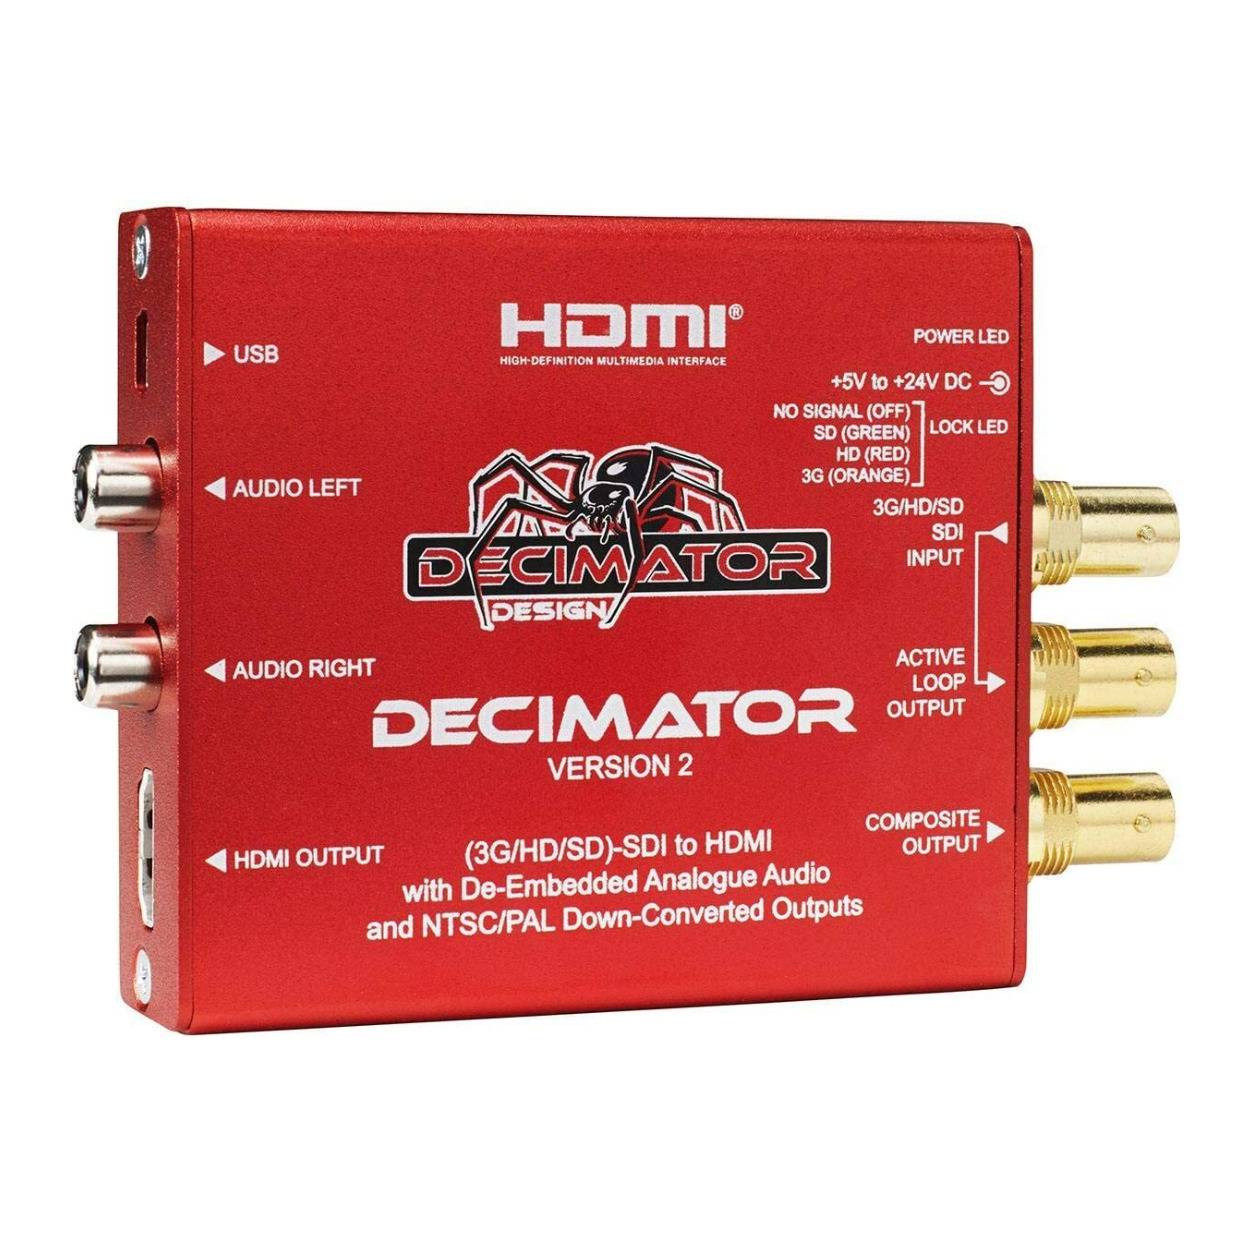 Decimator Version 2 Simultaneously Scales SDI to HDMI and NTSC/PAL with De-Embedded Analogue Audio